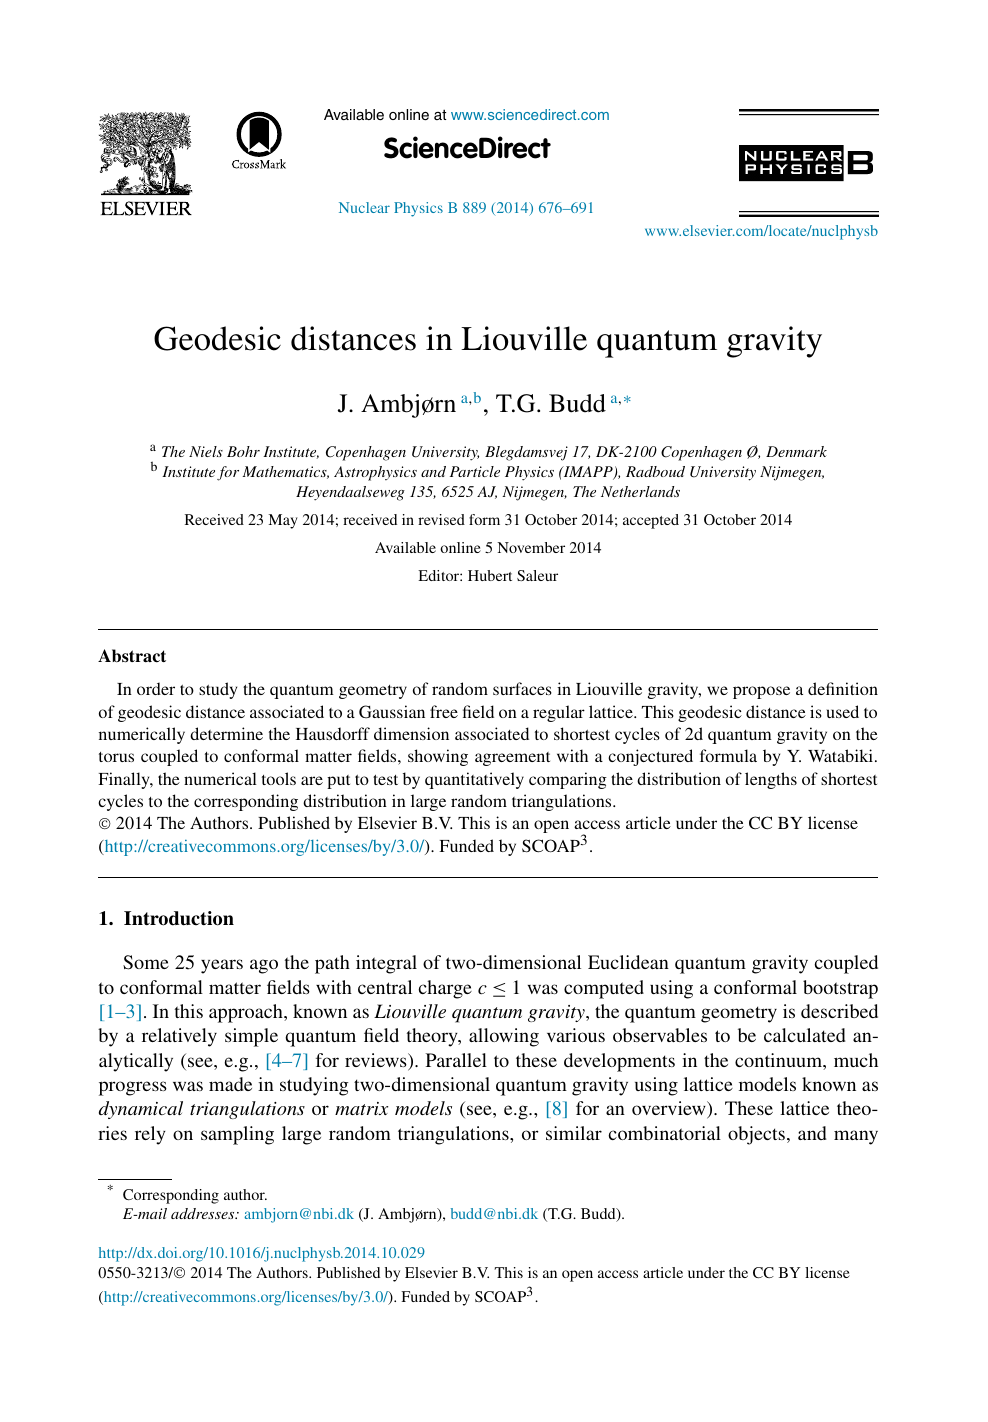 Geodesic Distances In Liouville Quantum Gravity Topic Of Research Paper In Physical Sciences Download Scholarly Article Pdf And Read For Free On Cyberleninka Open Science Hub